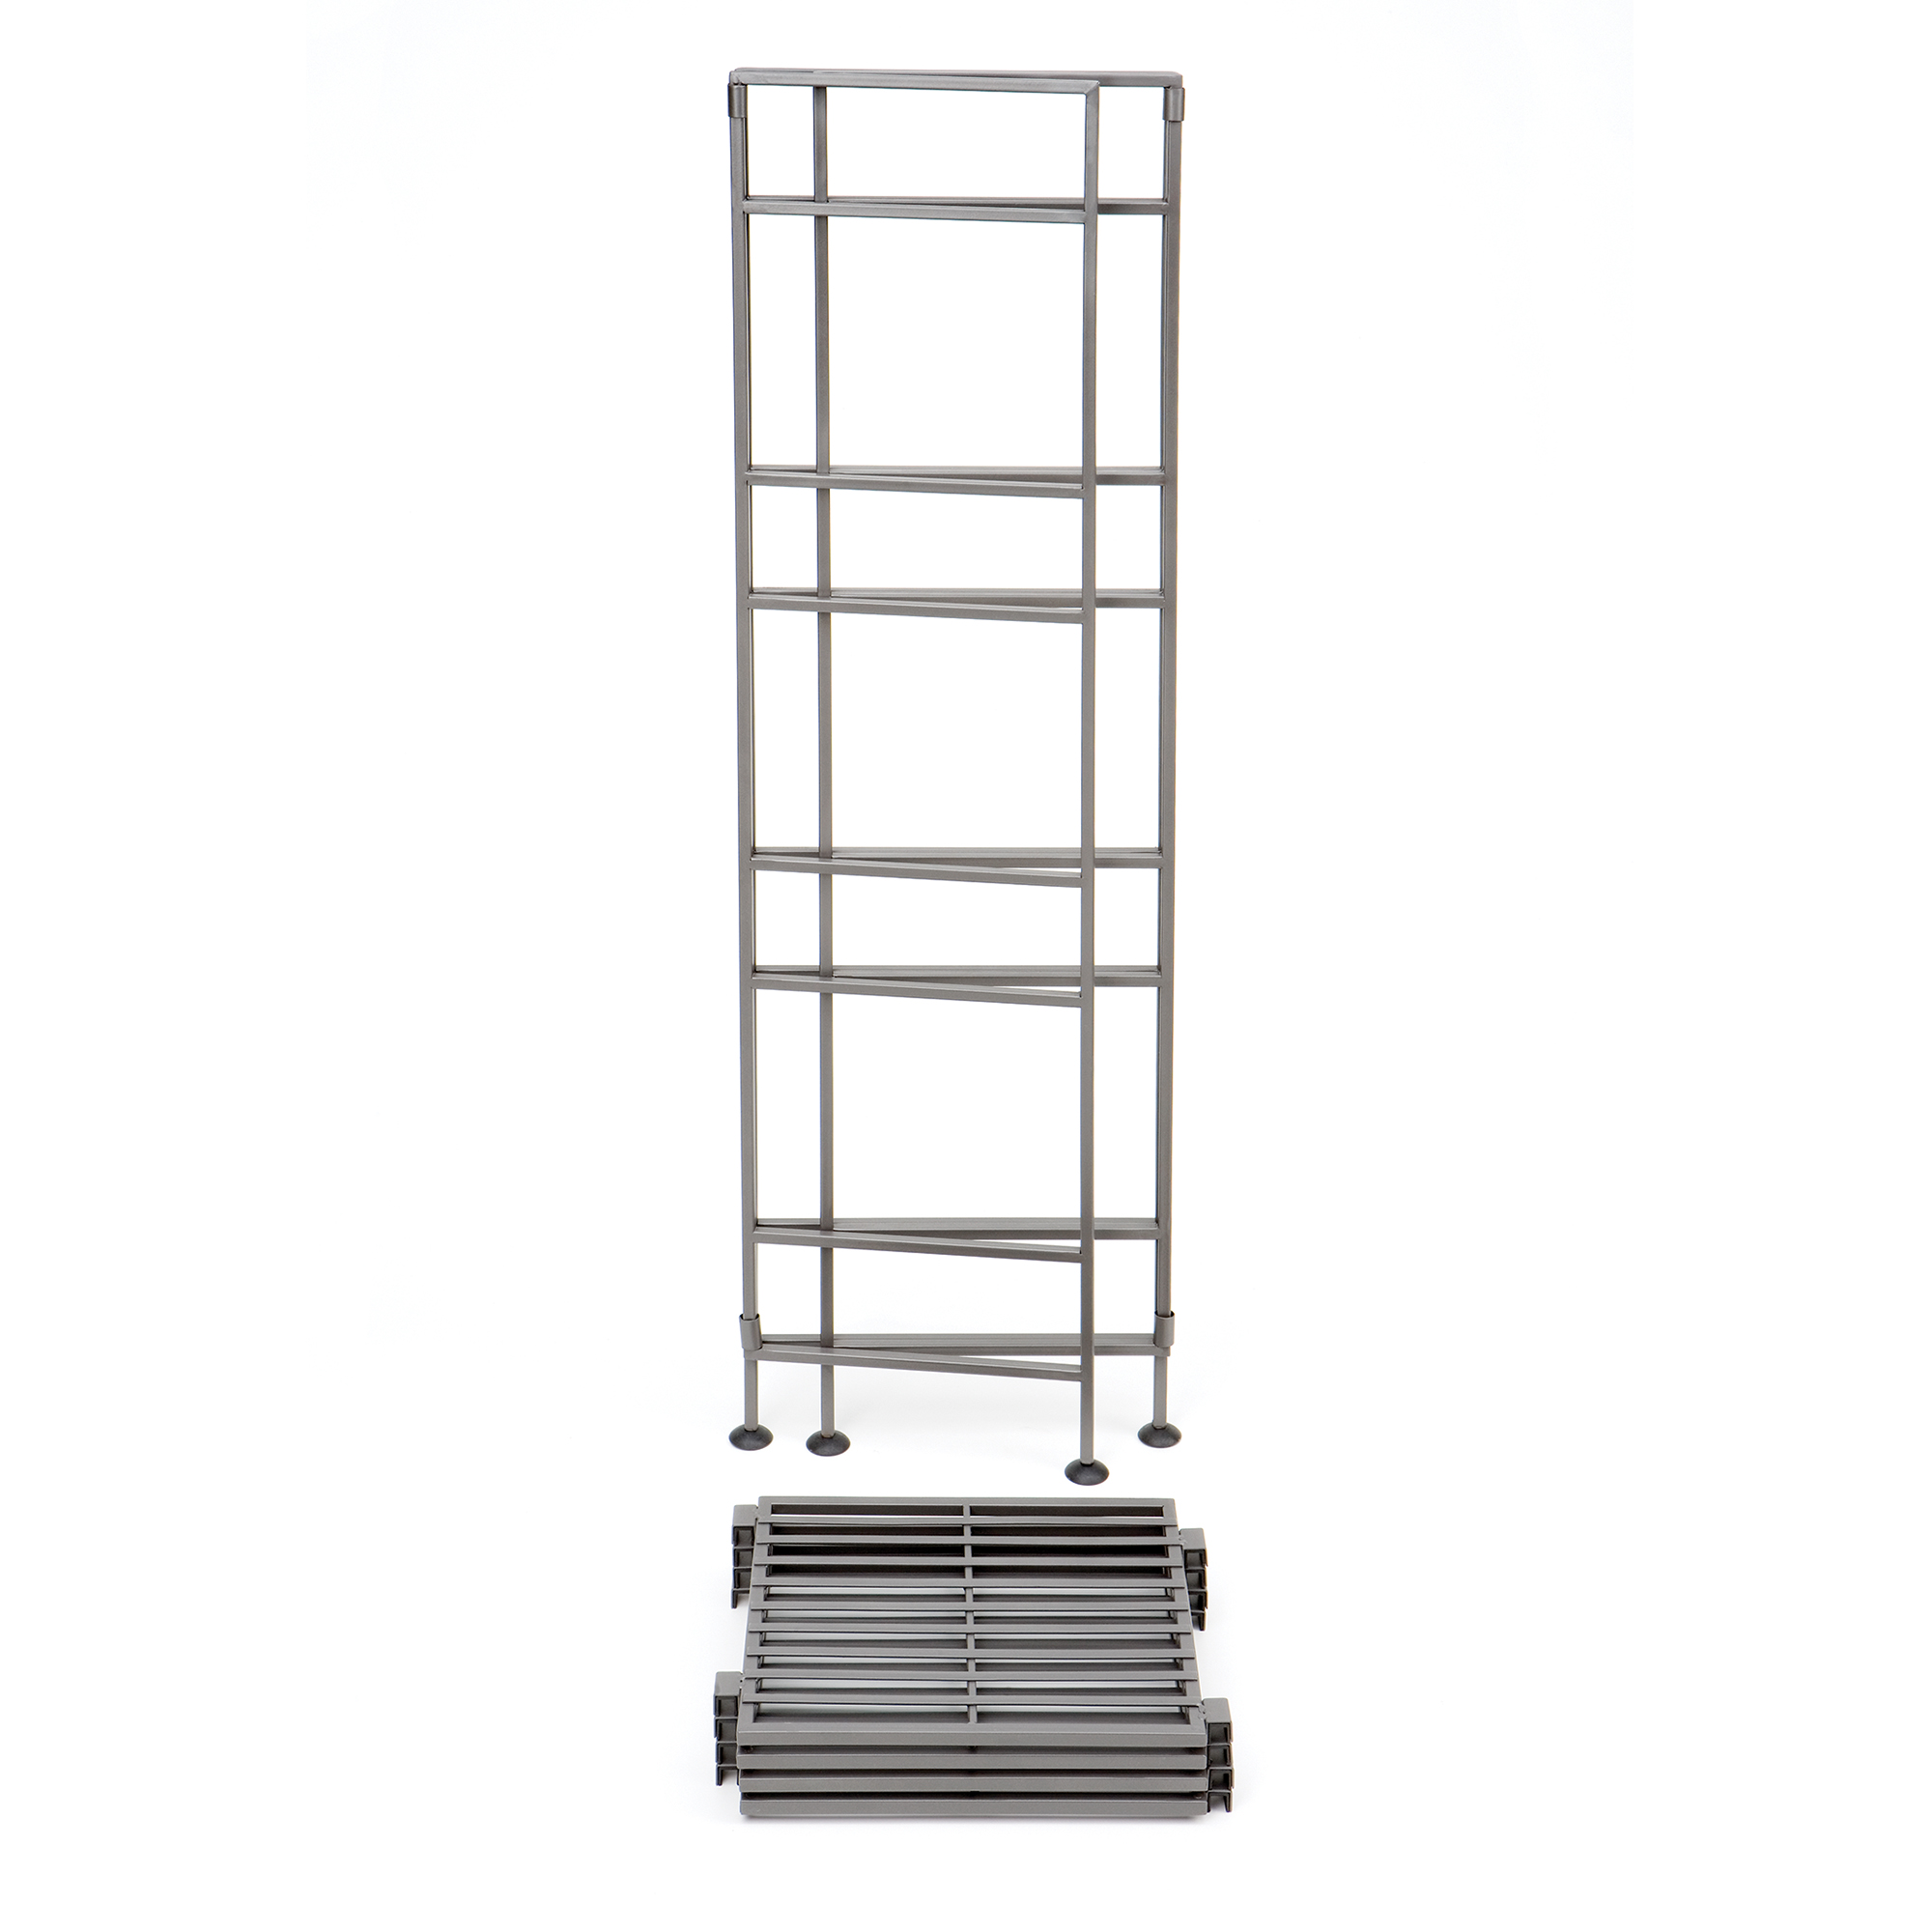 4-Tier Iron Tower Shelving, Pewter 11.3"D x 13"W x 44.3"H by Seville Classics - image 2 of 8